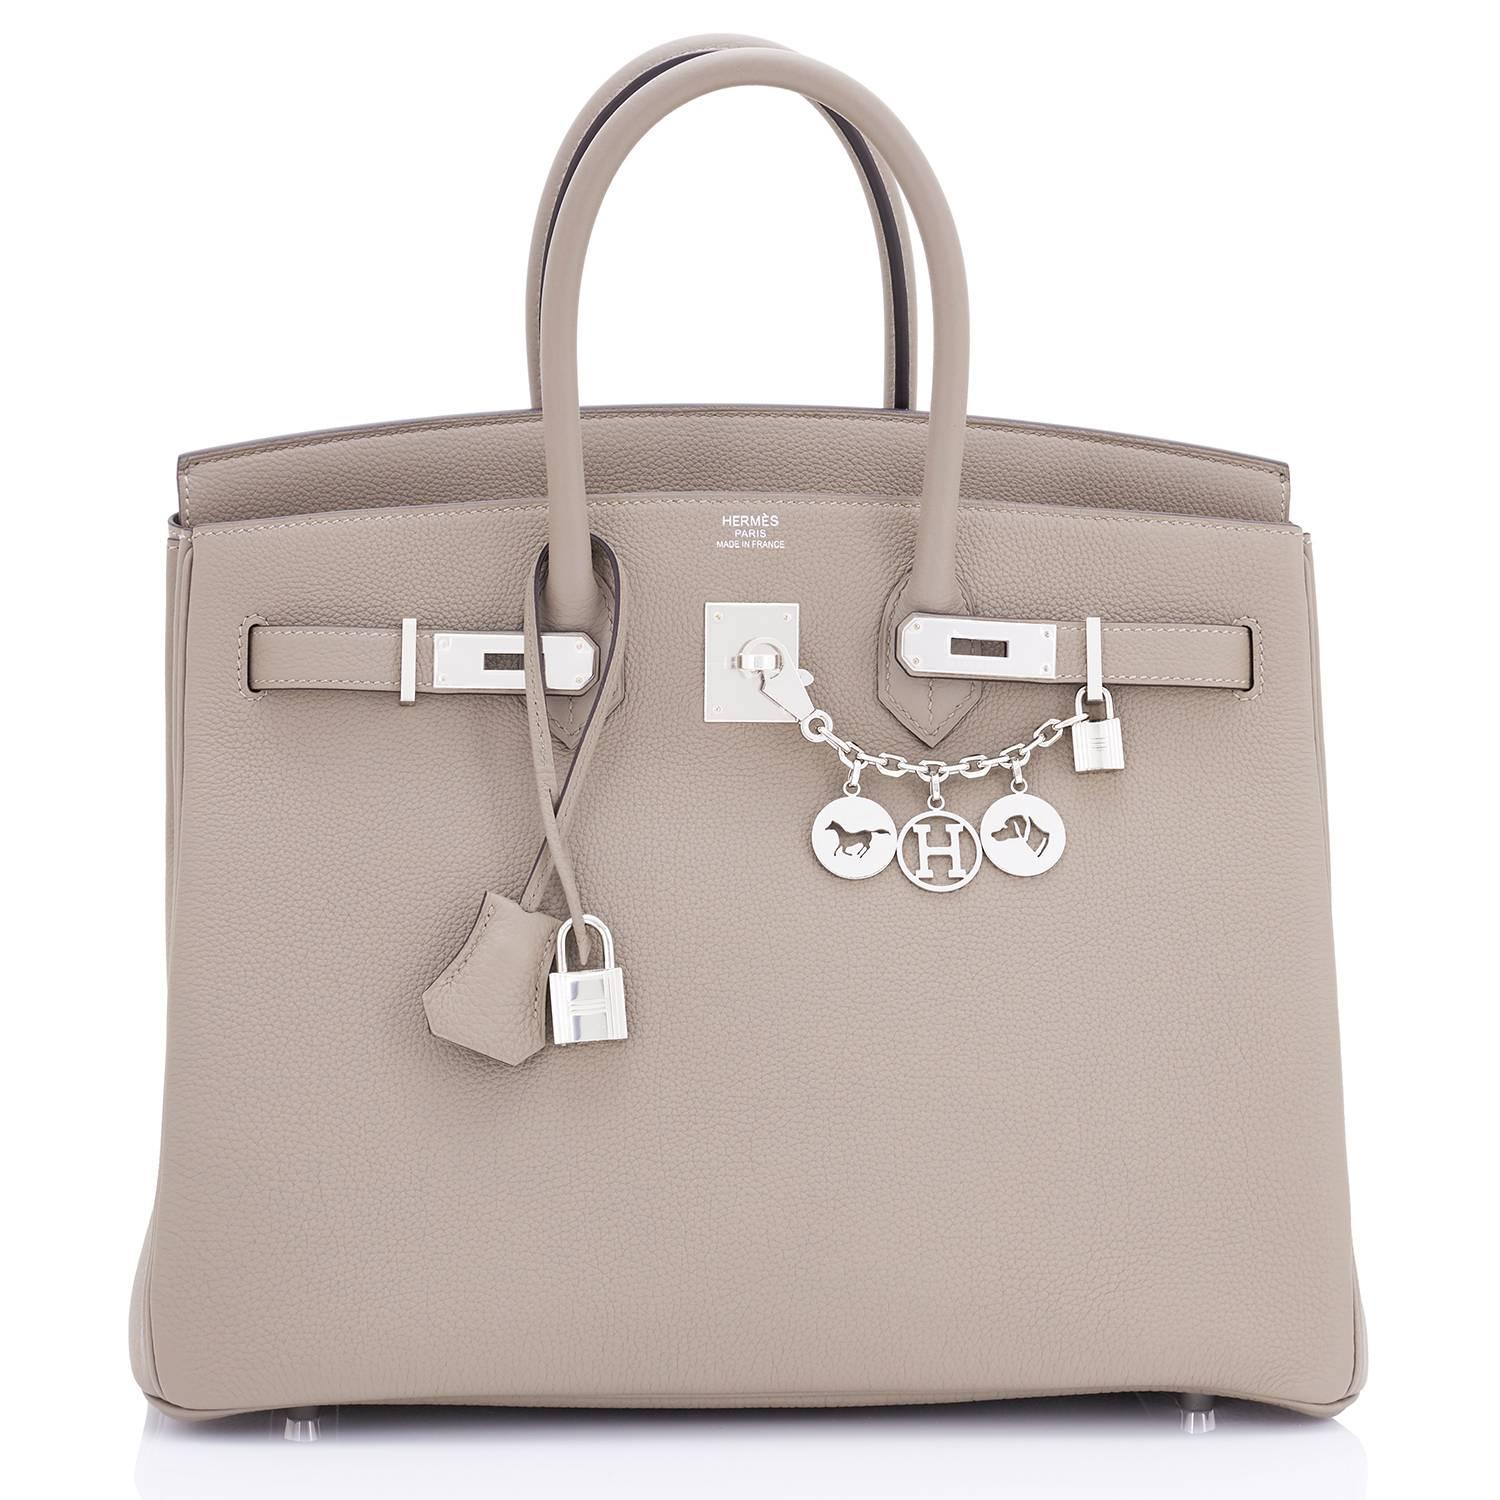 Hermes Birkin 35 Gris Asphalte Dove Grey Togo Palladium Bag
Devastatingly gorgeous!  
Gris Asphalte is a brand new color, and the best neutral to come from Hermes in many years.
Brand New in Box. Store fresh. Pristine Condition (with plastic on